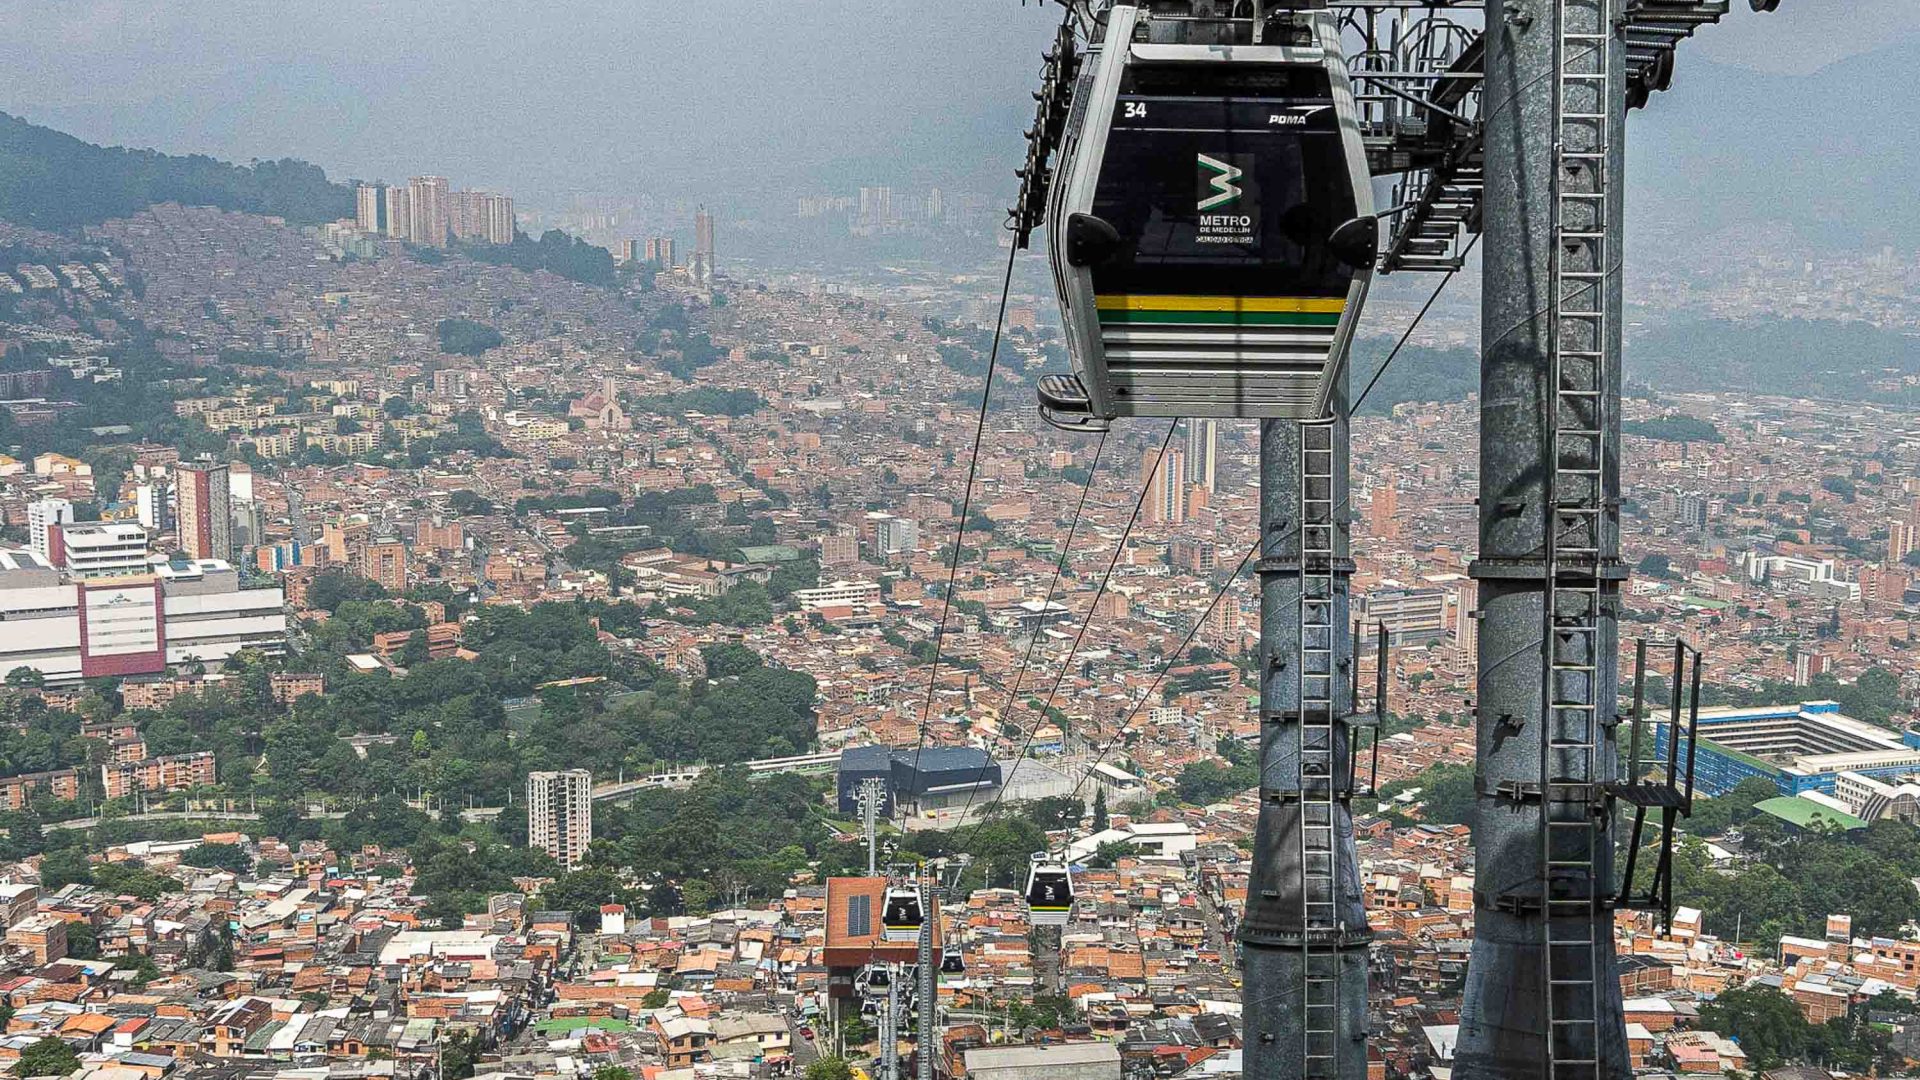 The Metrocable travels up the hill, with views of the city behind it.